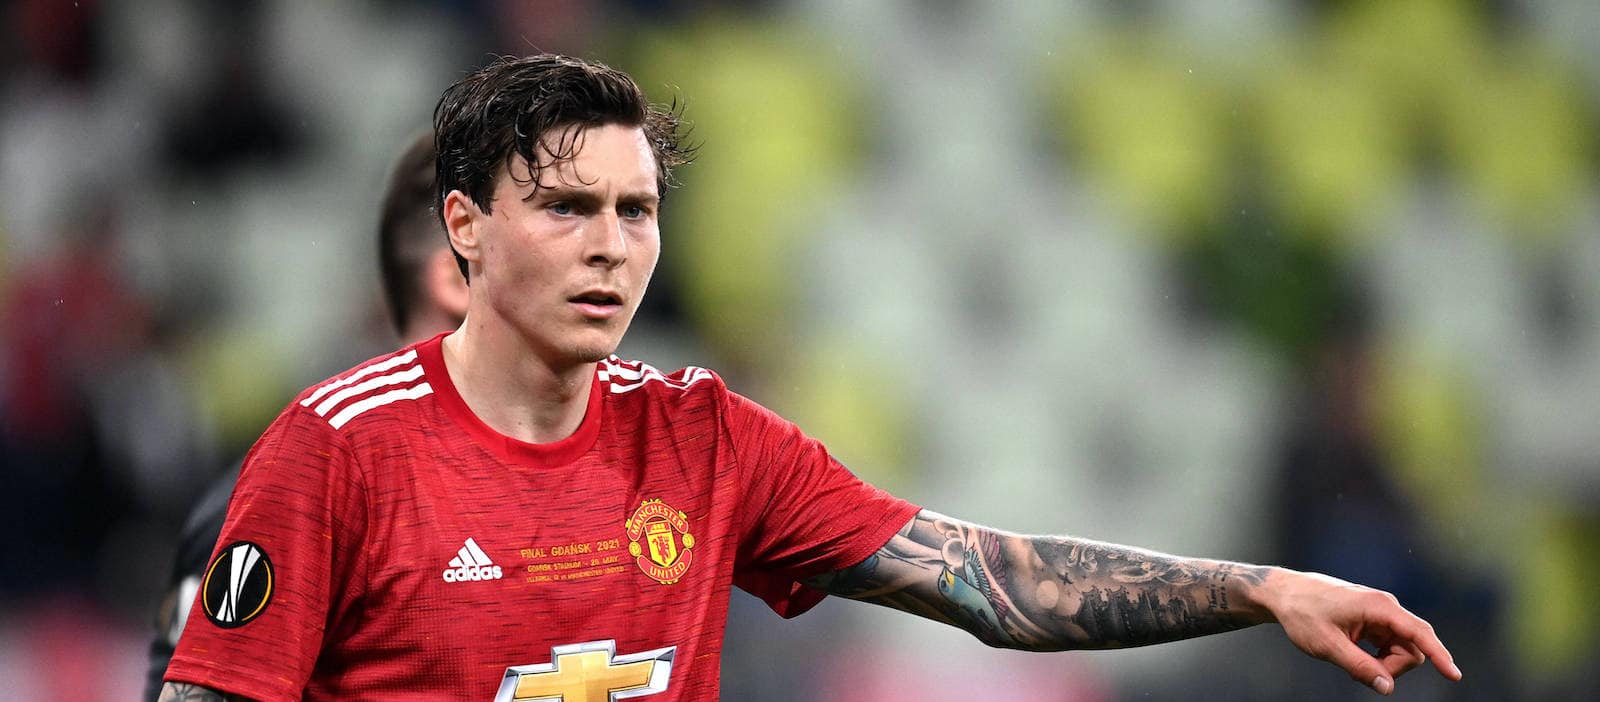 Martinez’s arrival doesn’t bother me one bit--Lindelof